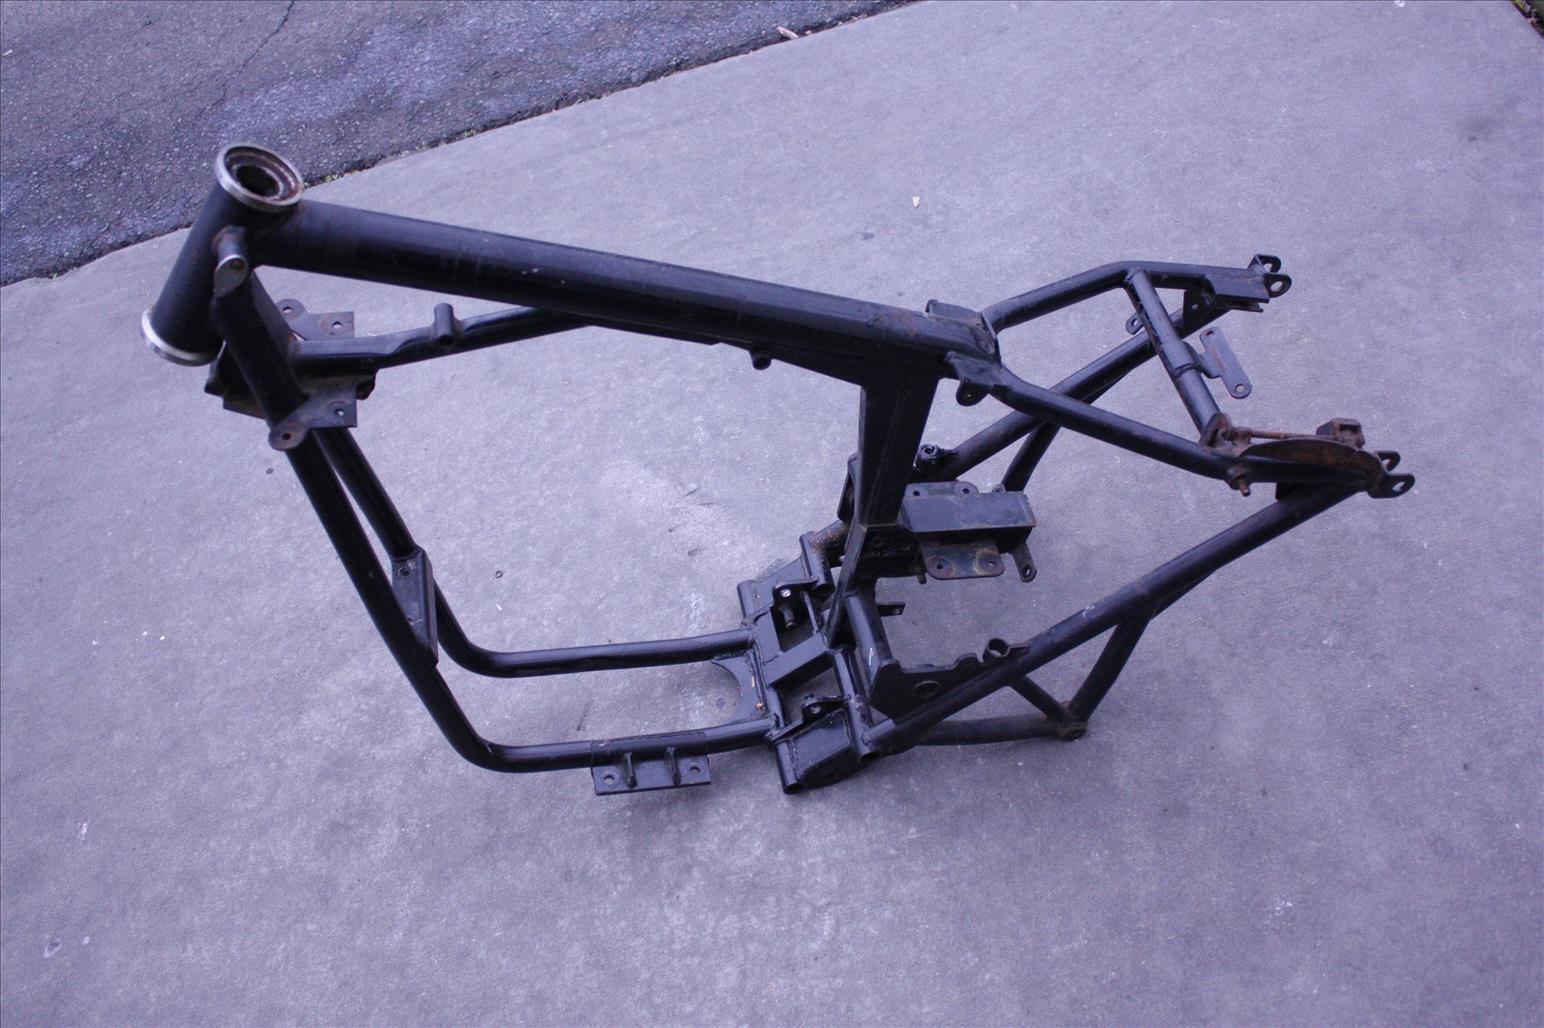 1972 BENELLI 650 S TORNADO MAIN FRAME CHASSIS BODY OEM 650S 72 Vintage Classic